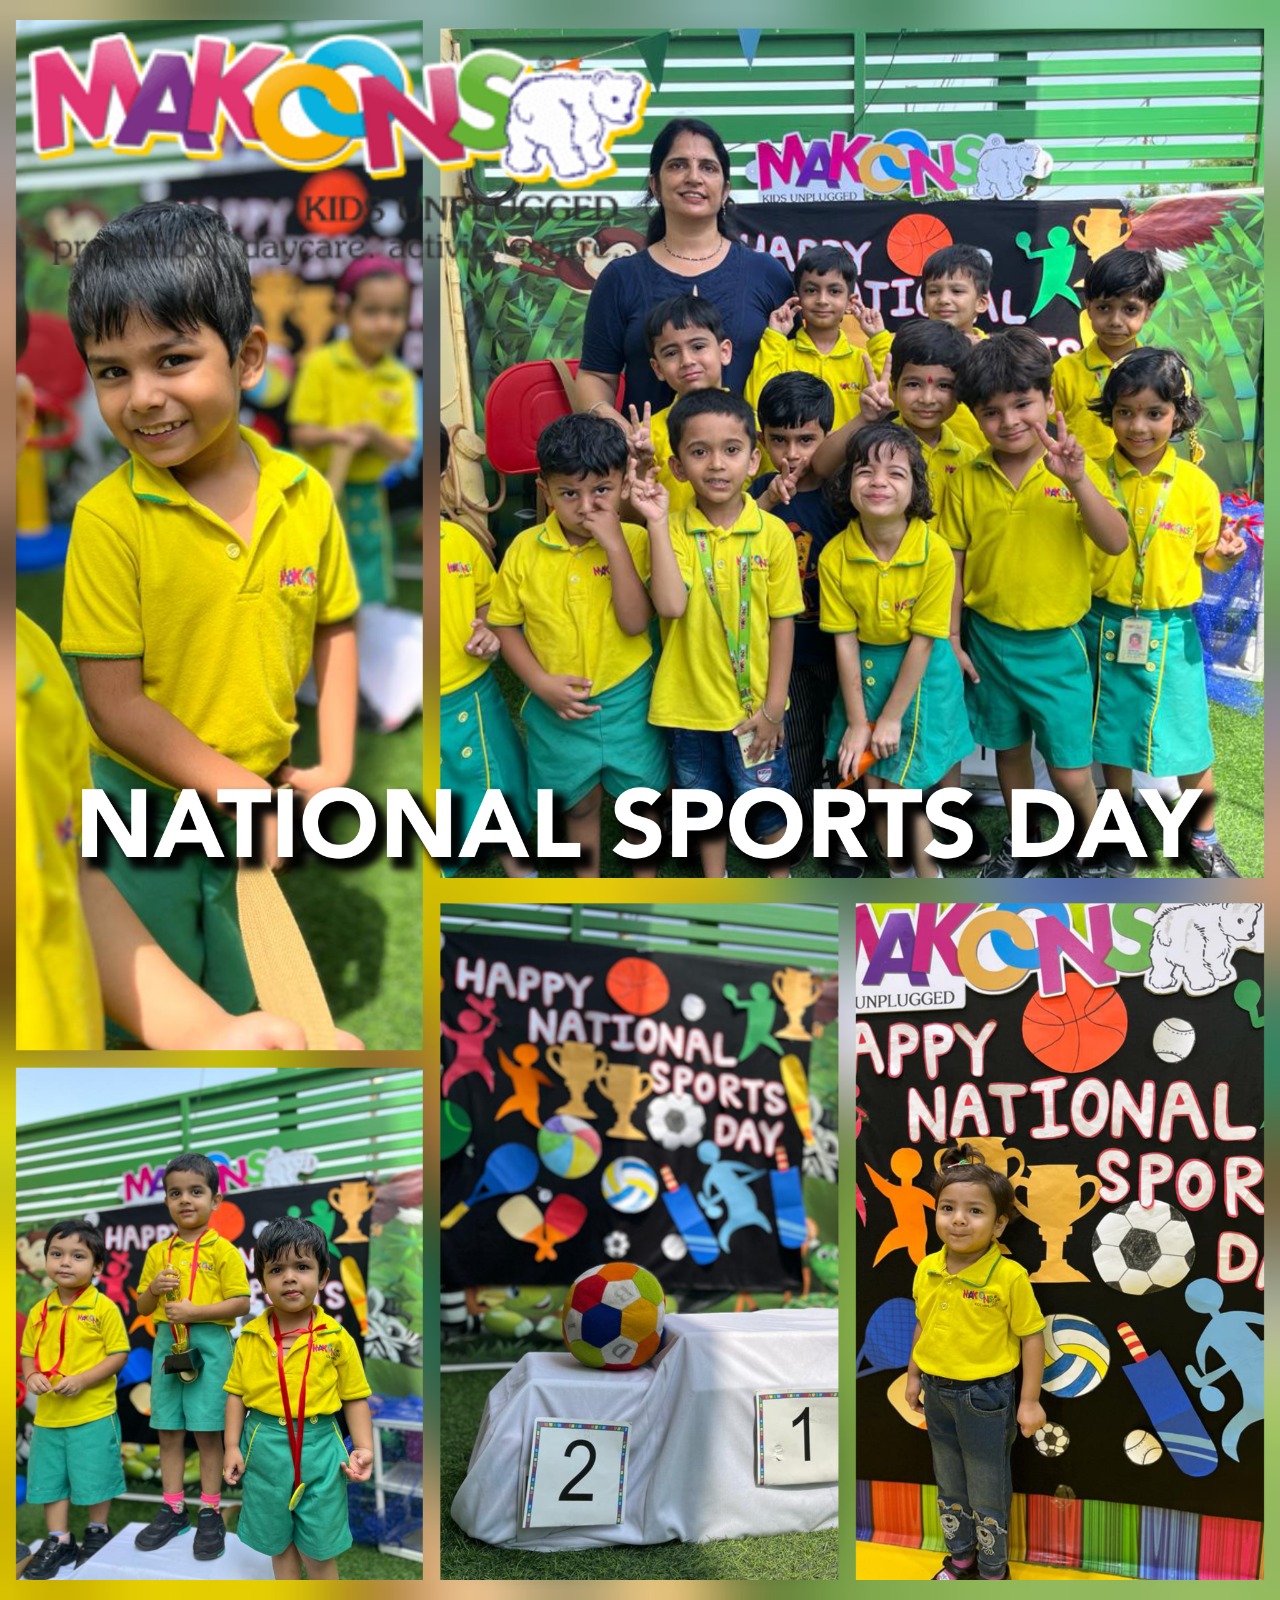 Makoons Play School Celebrates National Sports Day with Zeal and Enthusiasm Across All Branches decoding=